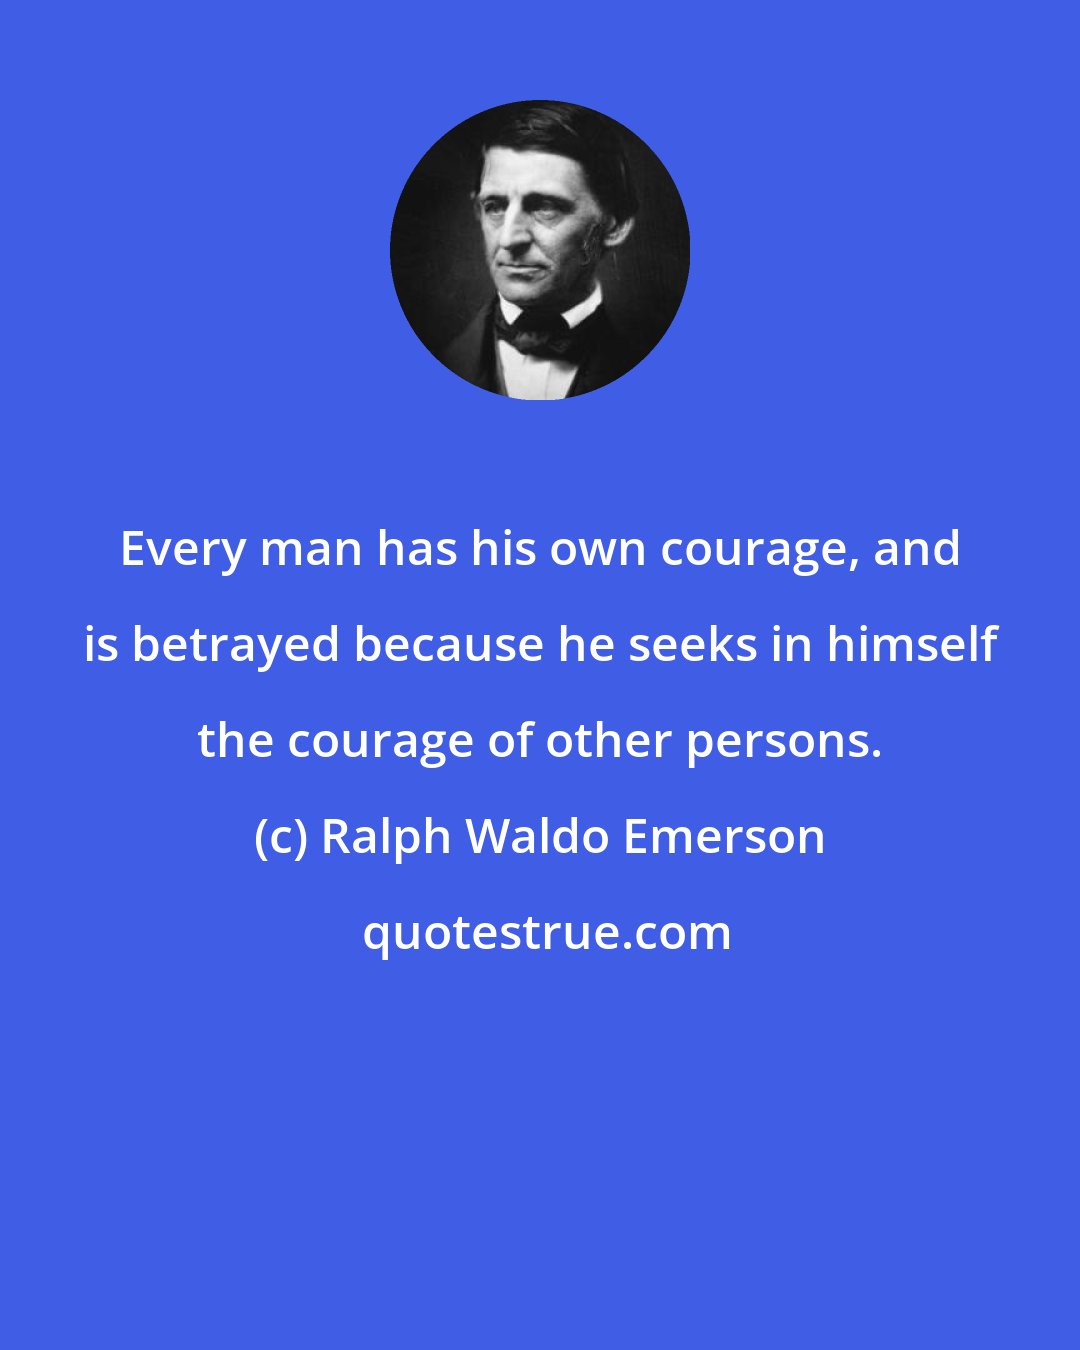 Ralph Waldo Emerson: Every man has his own courage, and is betrayed because he seeks in himself the courage of other persons.